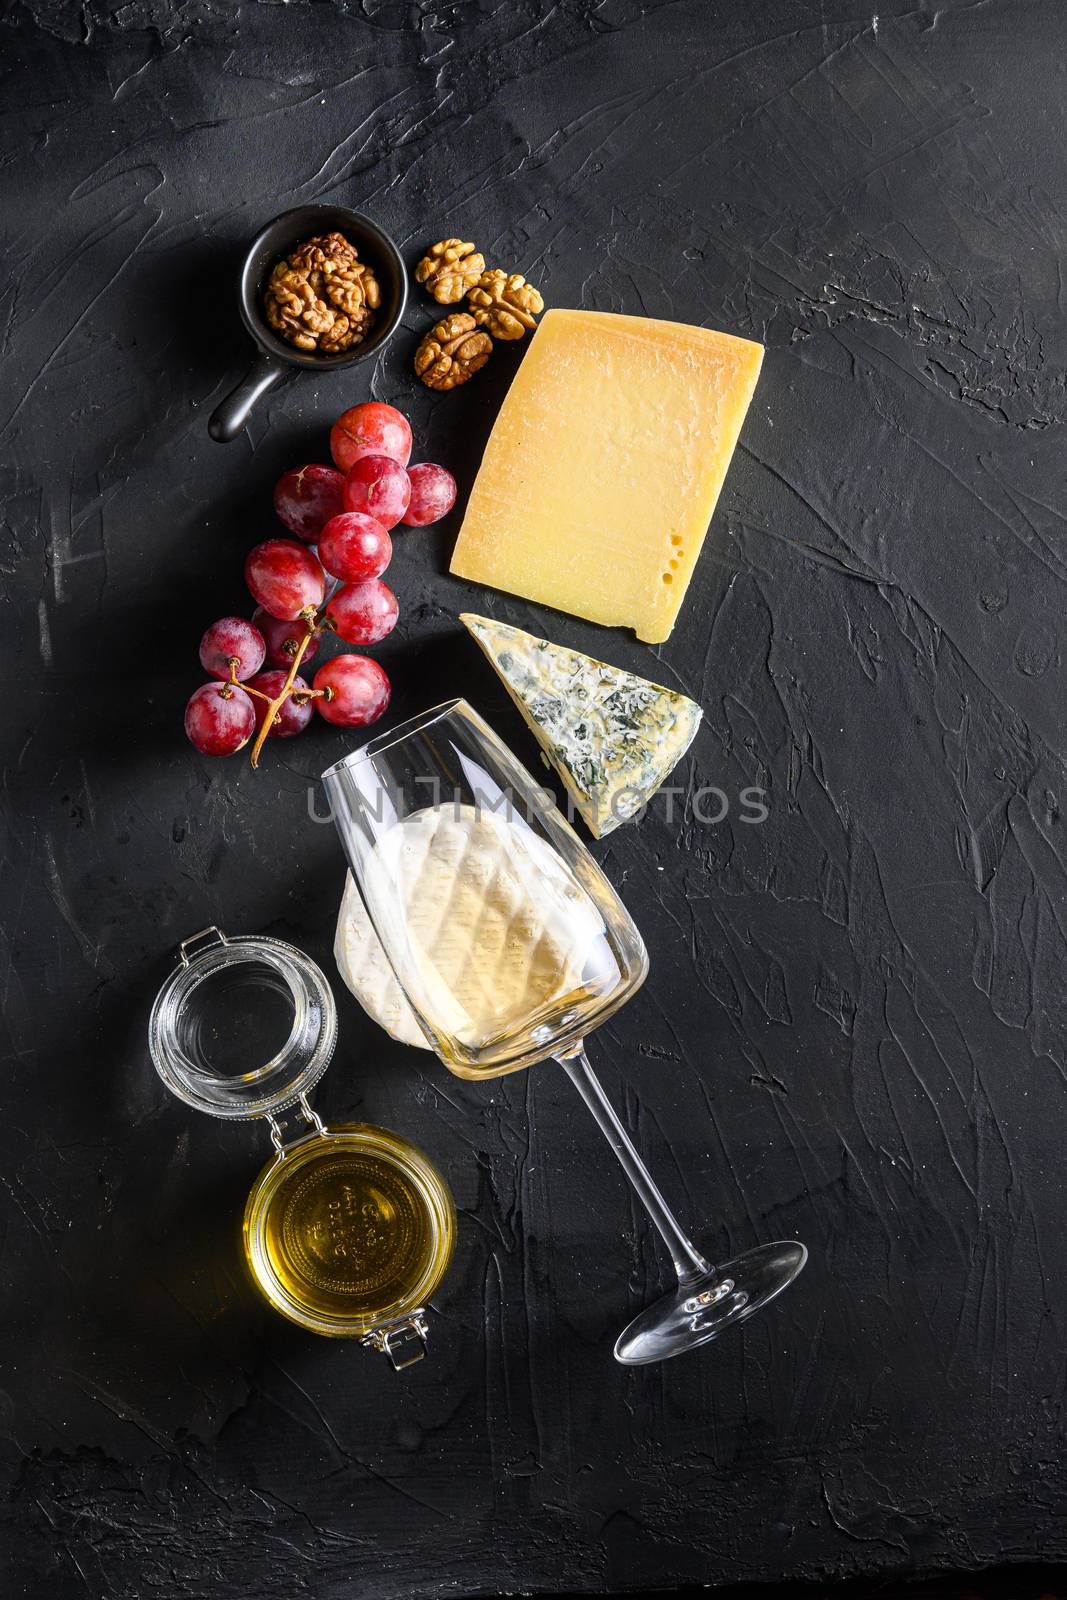 Cheese appetizer selection or whine snack set. Variety of mold french cheese, grapes, pecan nuts, white sauvignon wine and honey over black backdrop, top view, copy space vertical by Ilianesolenyi